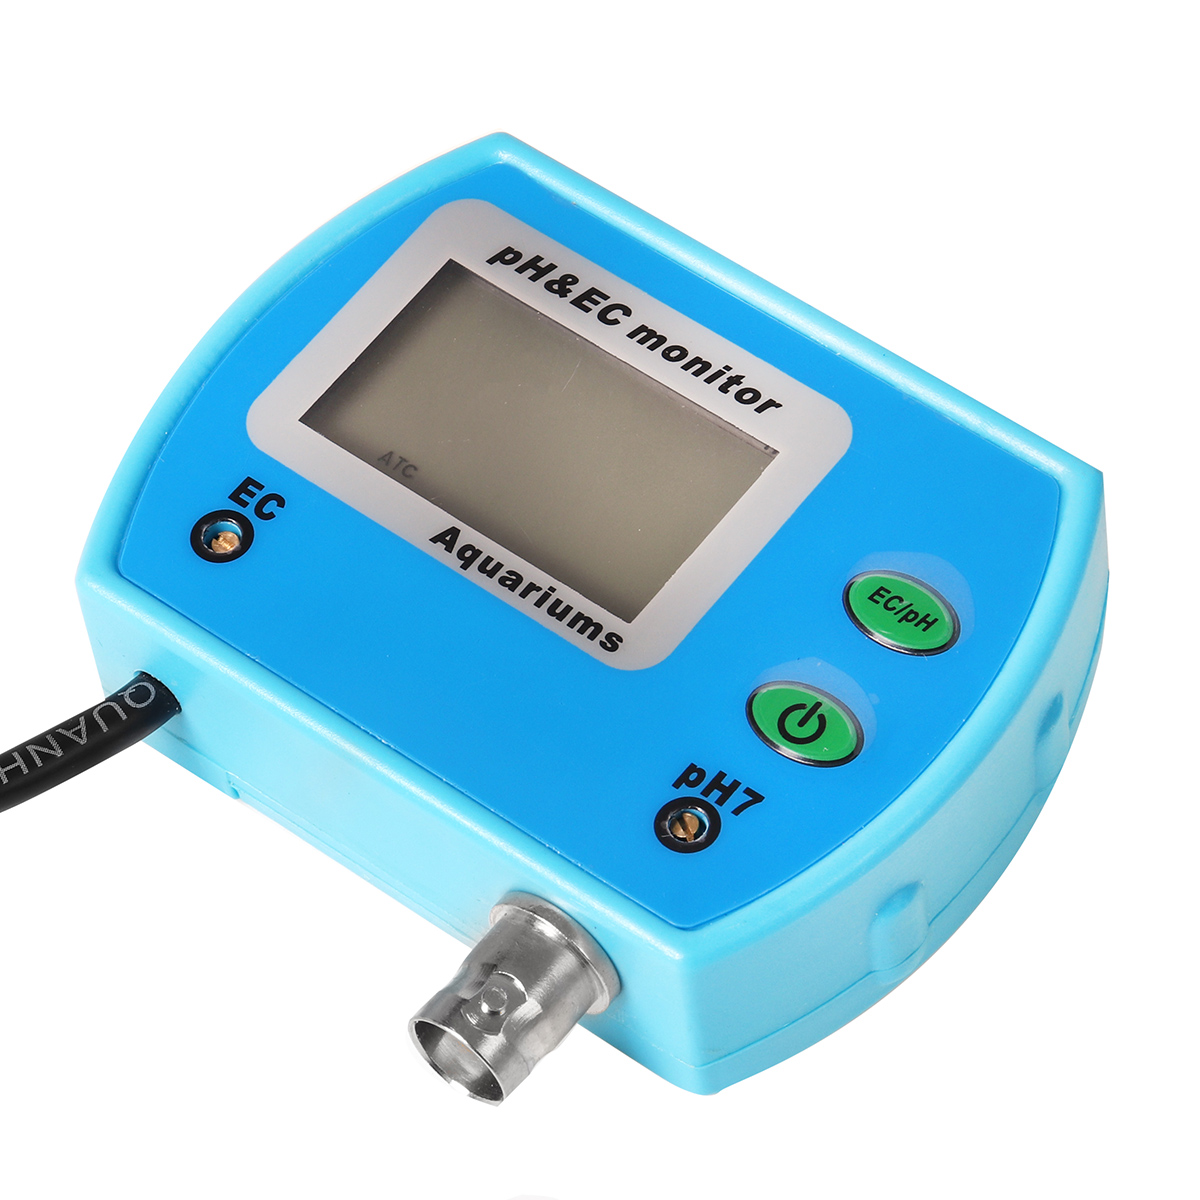 PHEC-2-in1-Water-Quality-Chlorine-Tester-Level-Meters-Swimming-Pool-Spa-Hot-Tub-1721851-7